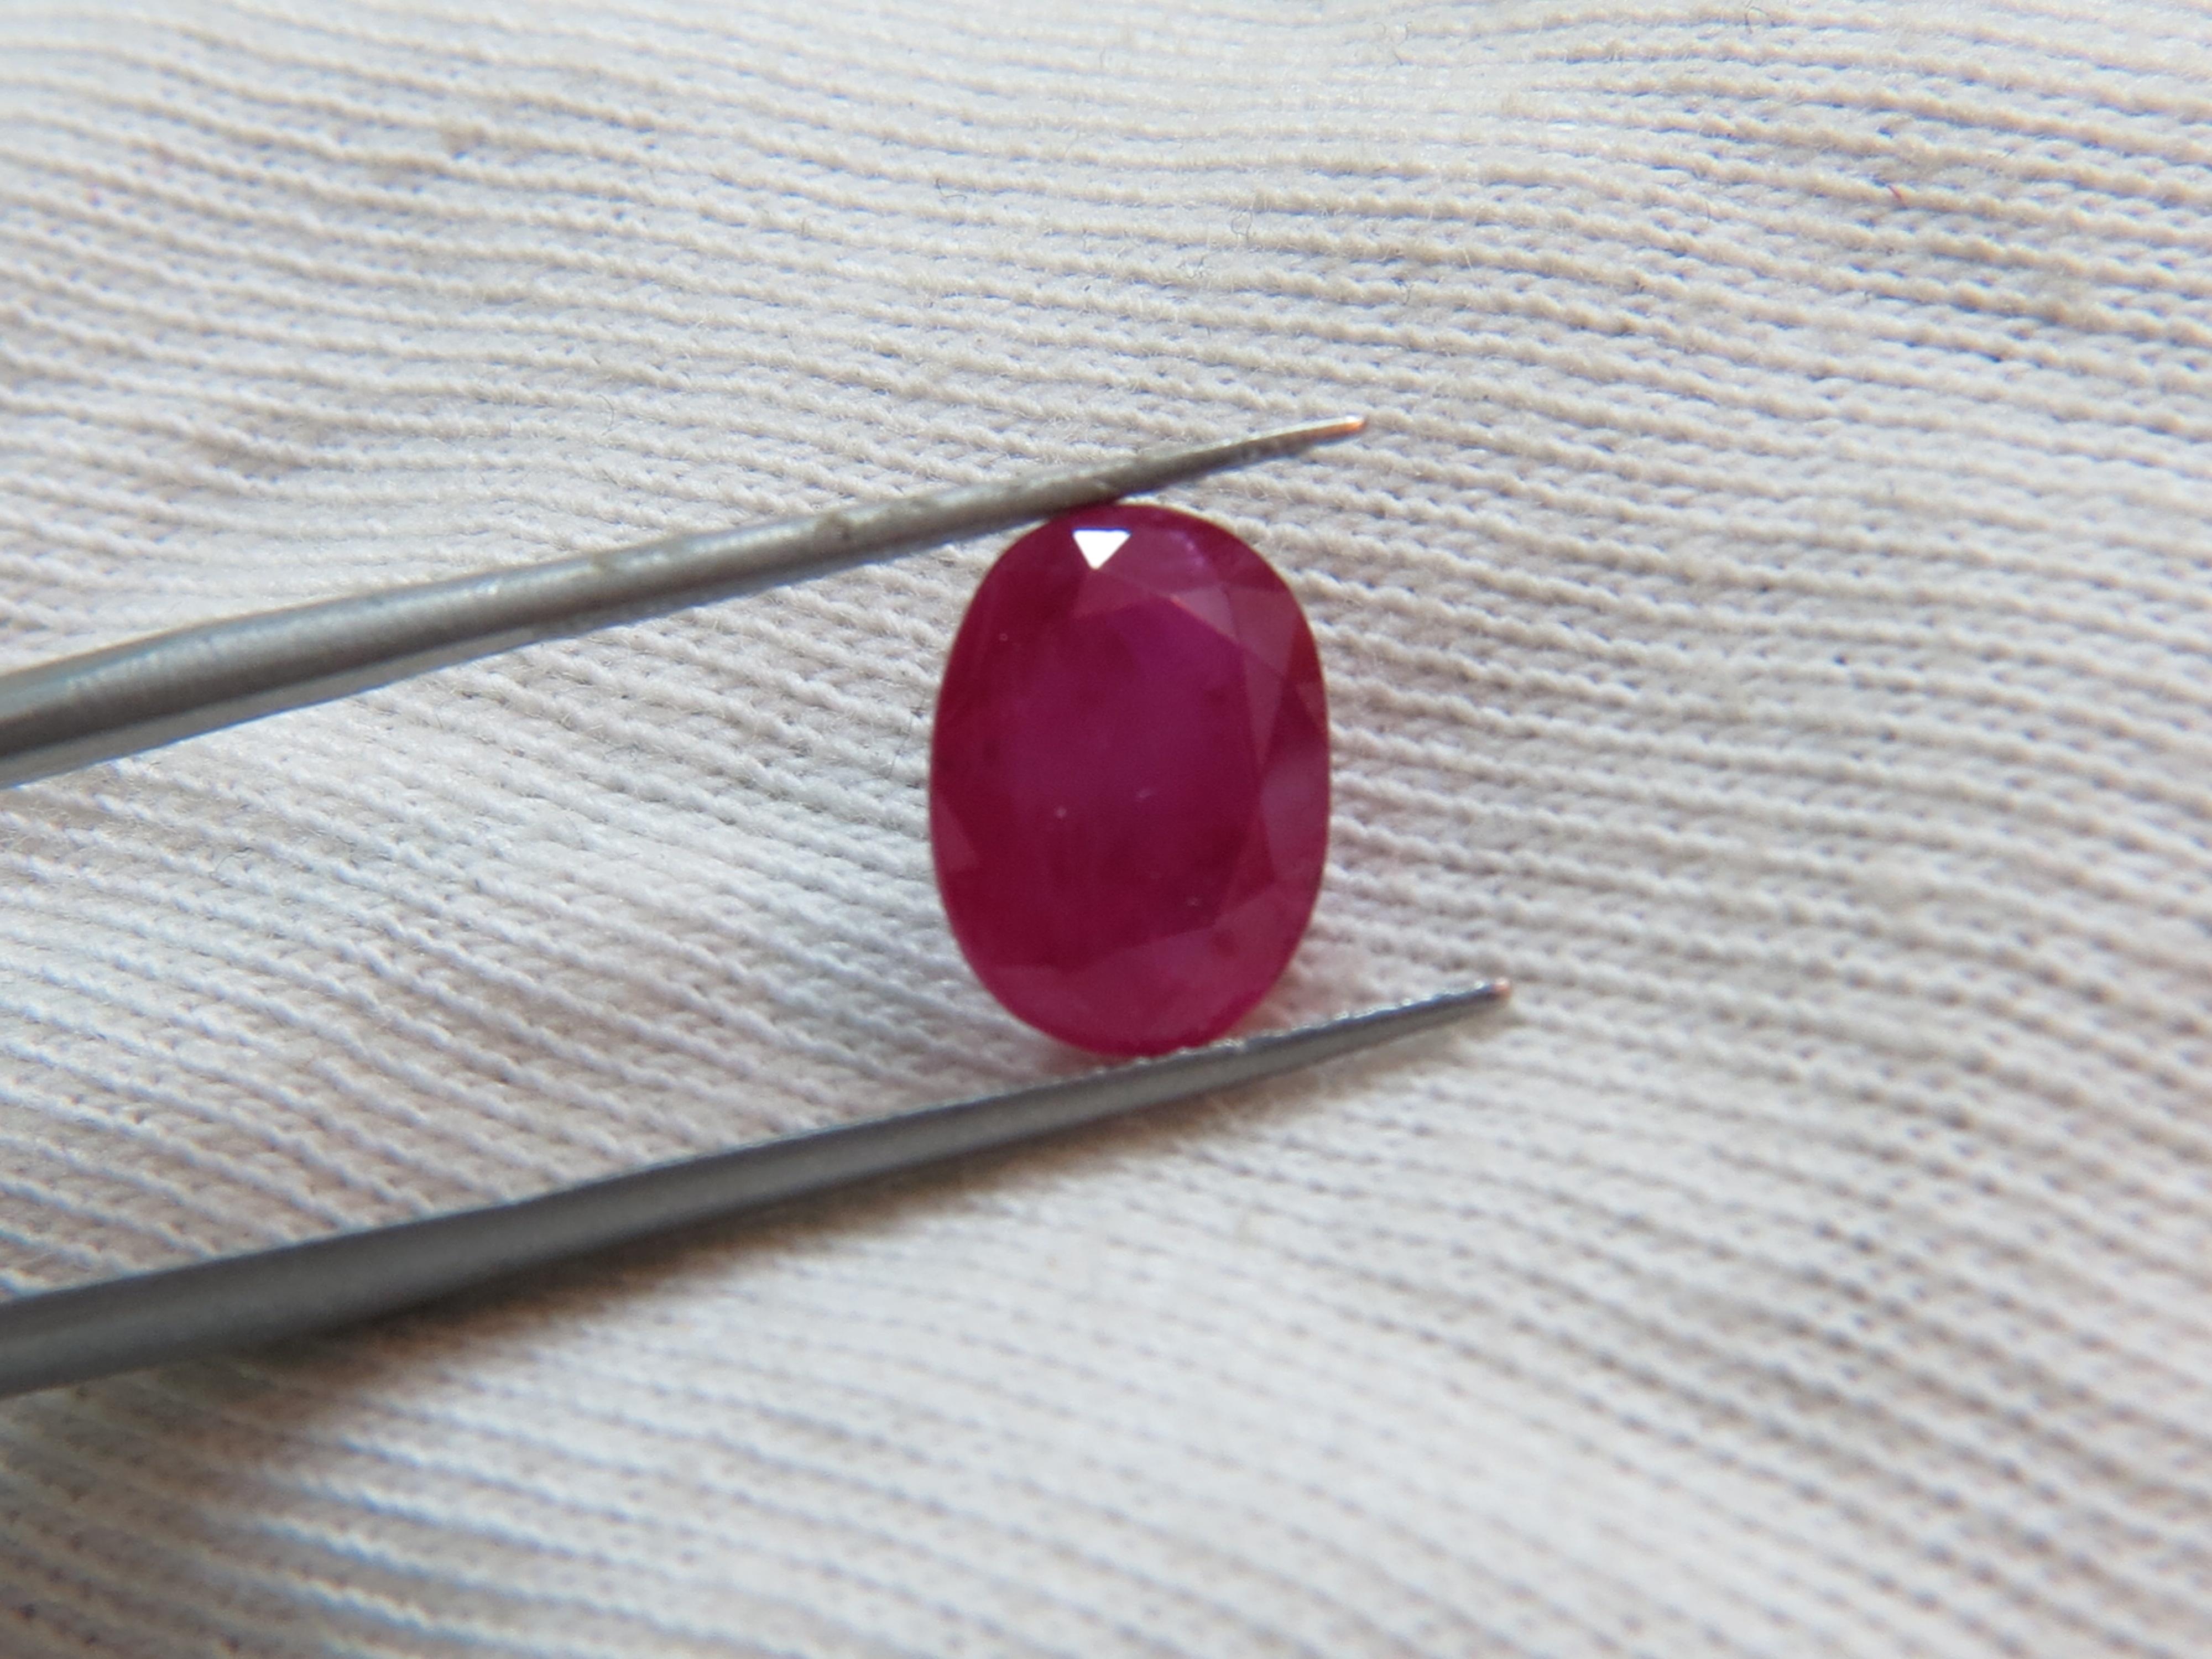 GIA Report: 2195200406
Oval Cut
Red
Heat Treat Only
10.69 x 7.92 x 4.73mm
To accompany in 14kt yellow gold mounting.